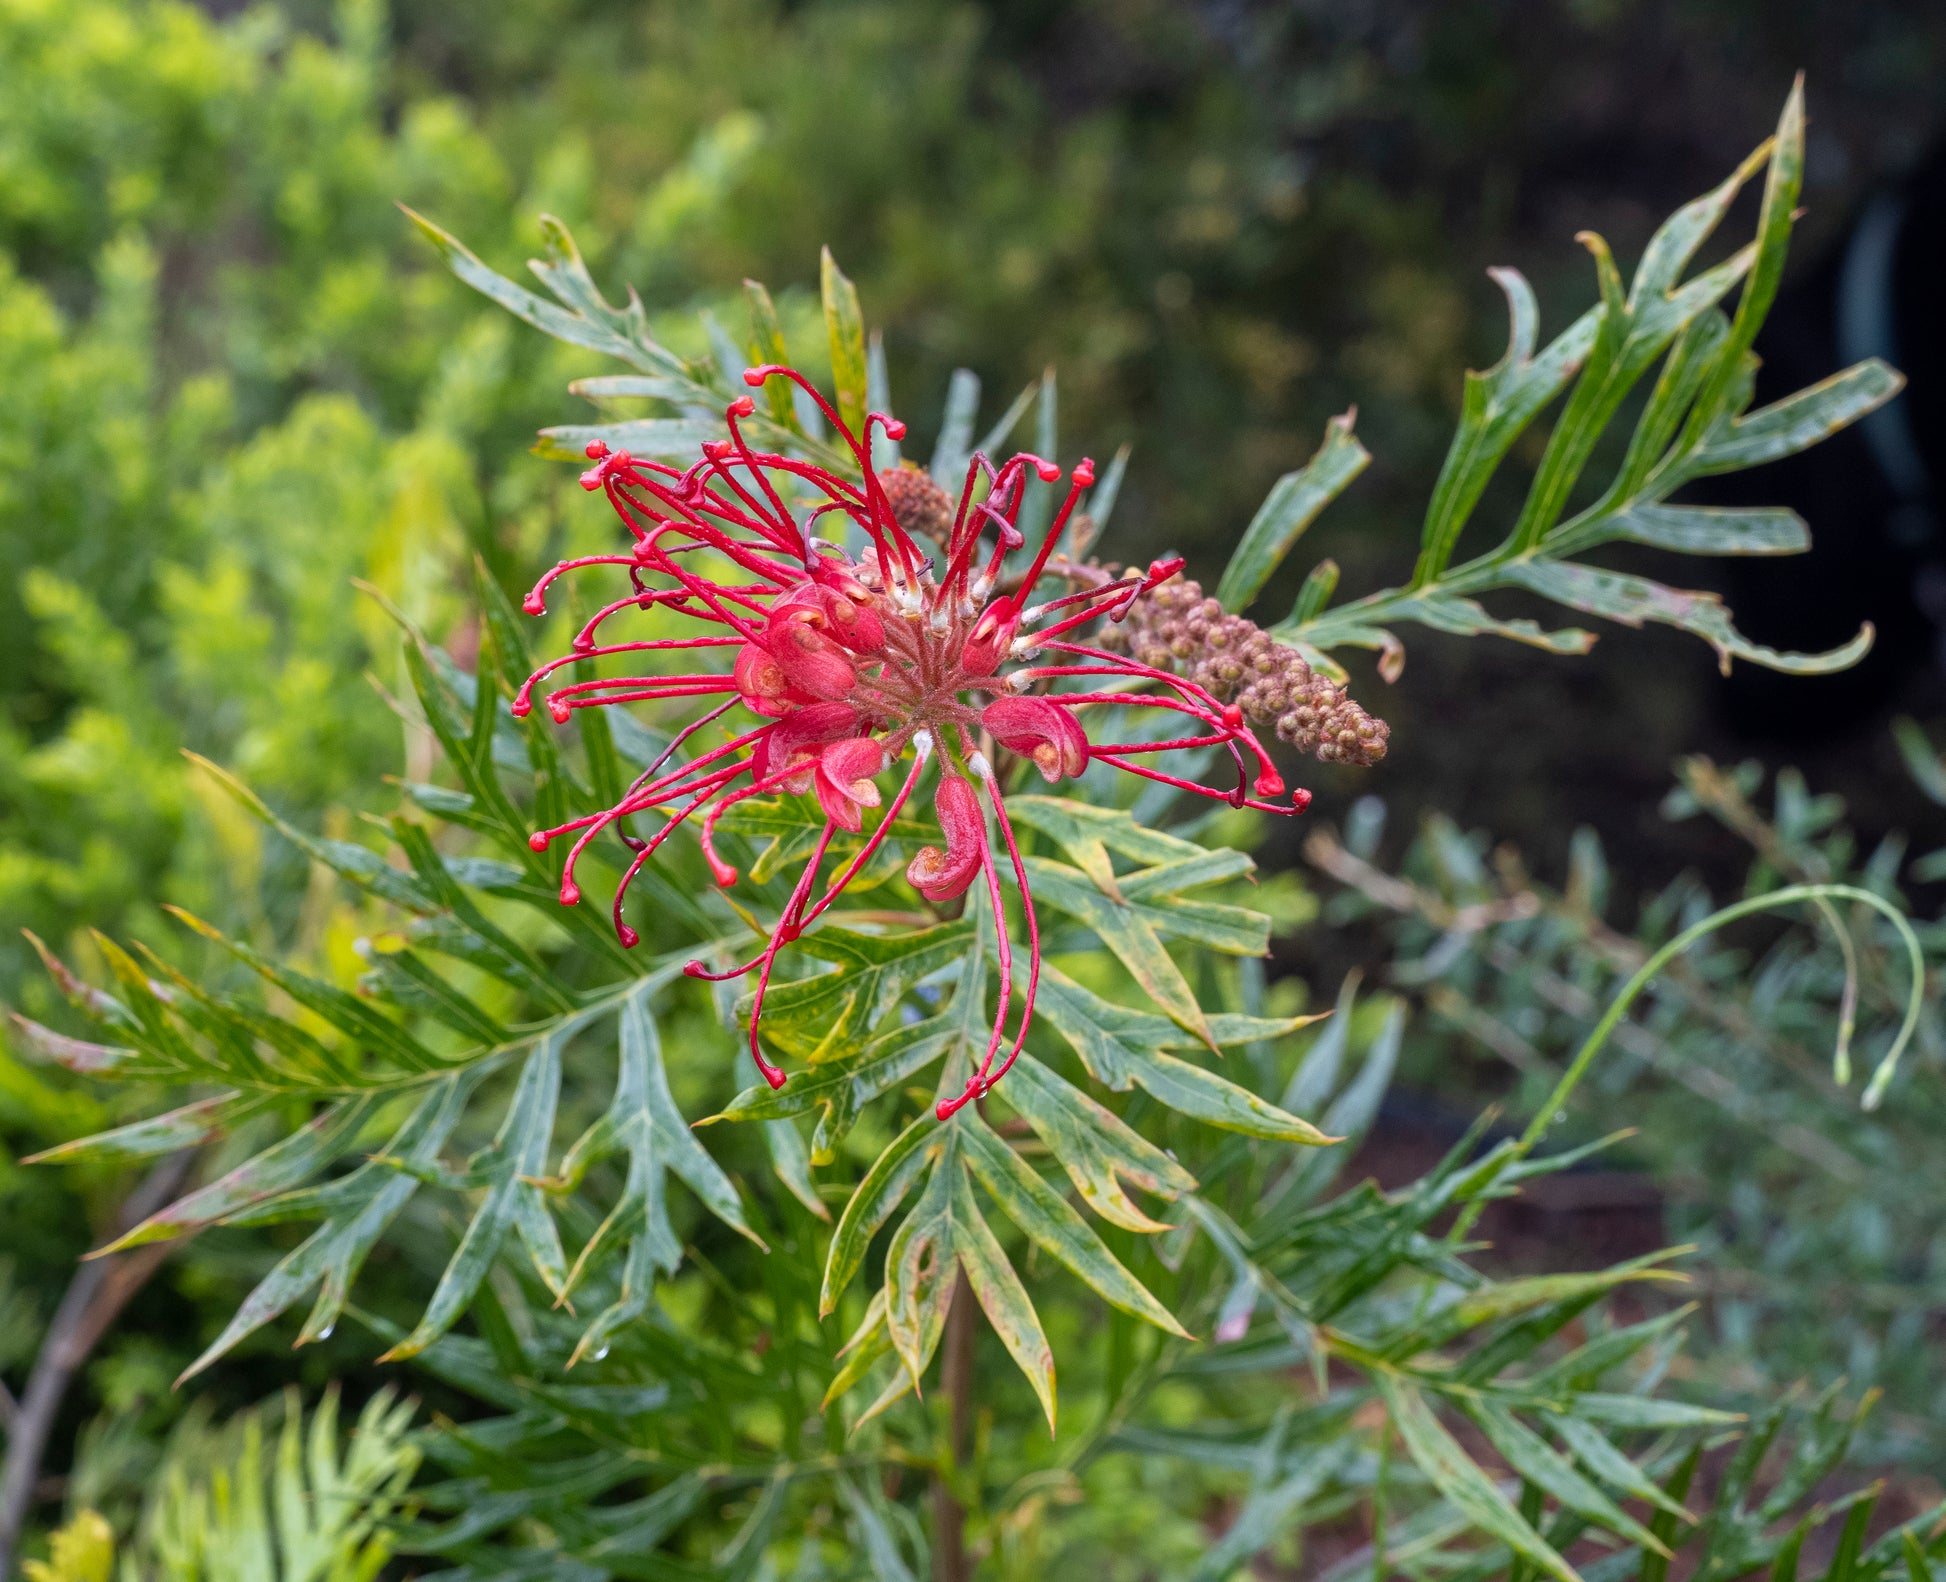 Close up photo of the red flower and seed pod on the Grevillea Robyn Gordon